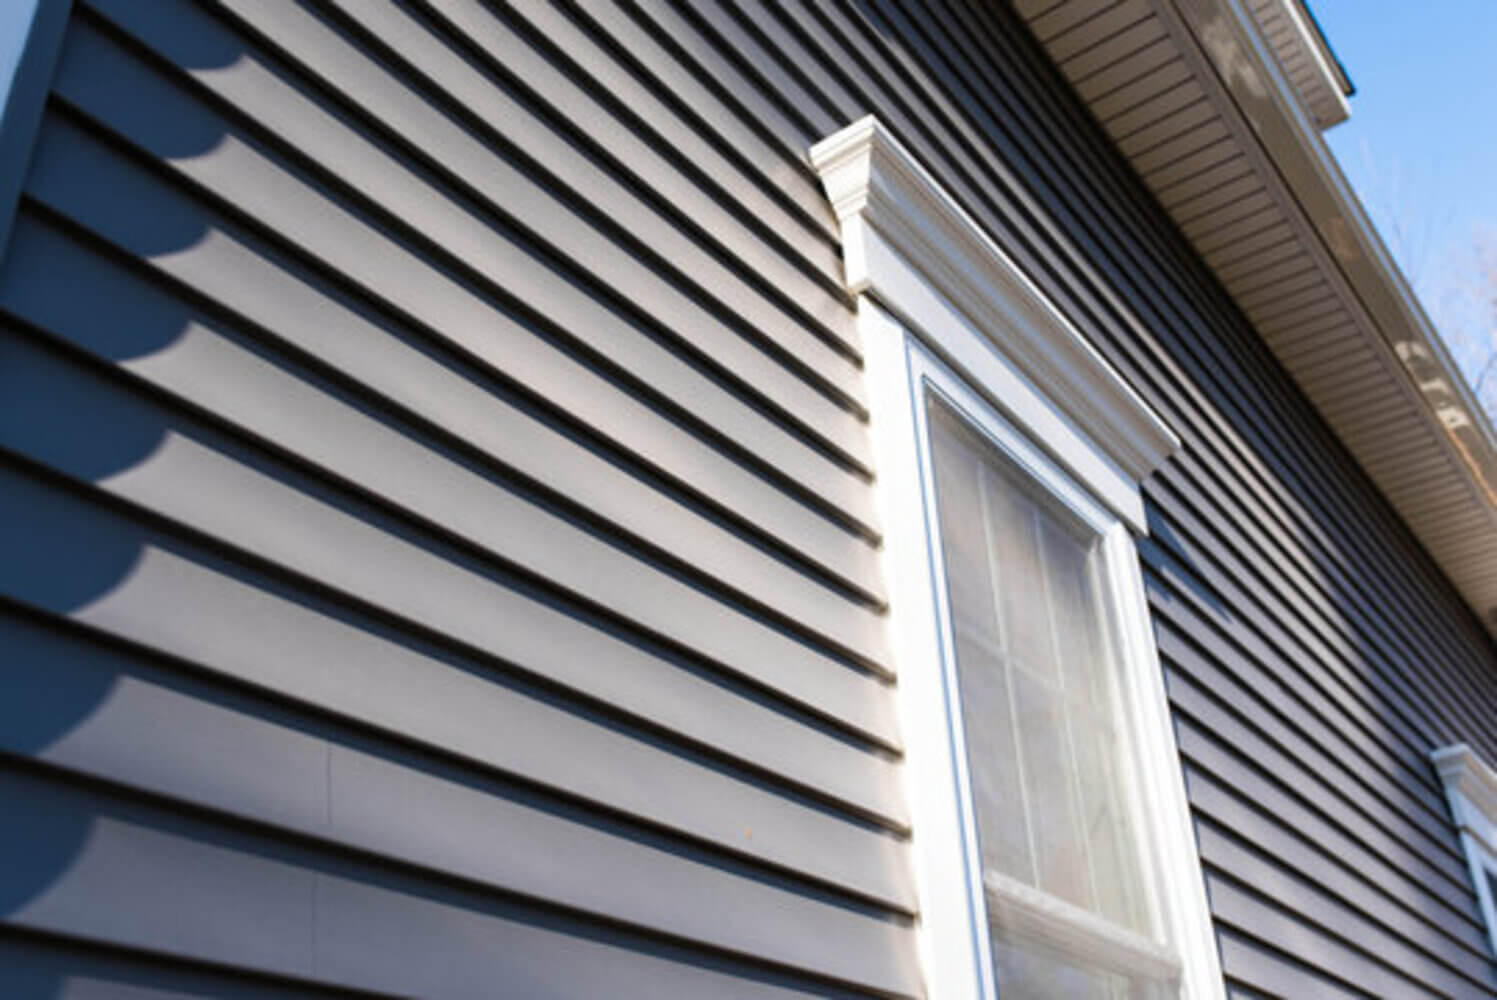 5 Best Ways to Maintain Your Vinyl Siding